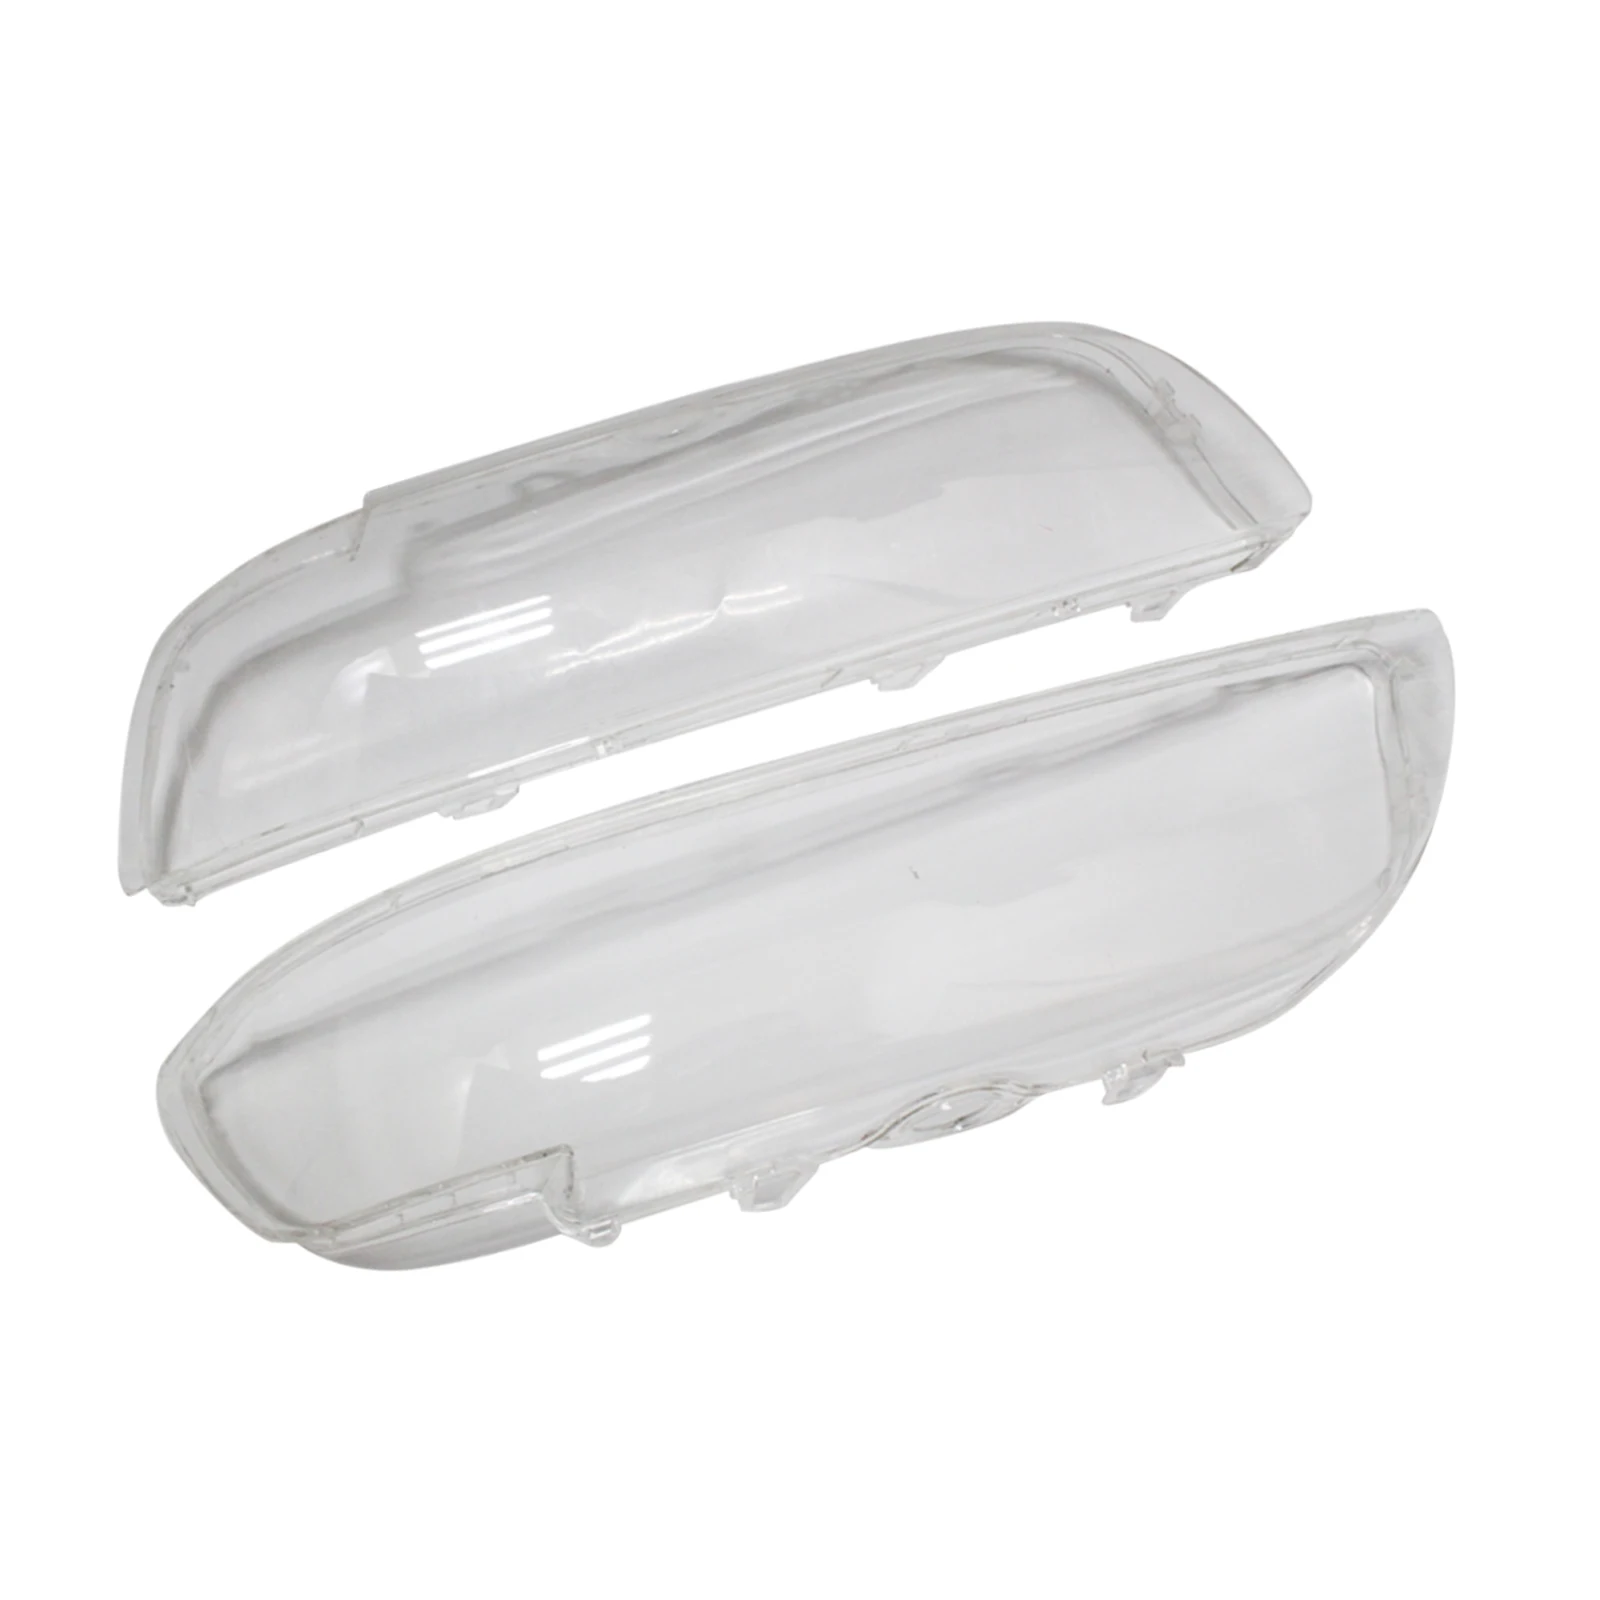 2x Right and Left Headlight Headlamp Lens Cover Compatible Replacements for BMW E39 523 525 528 530 Durable